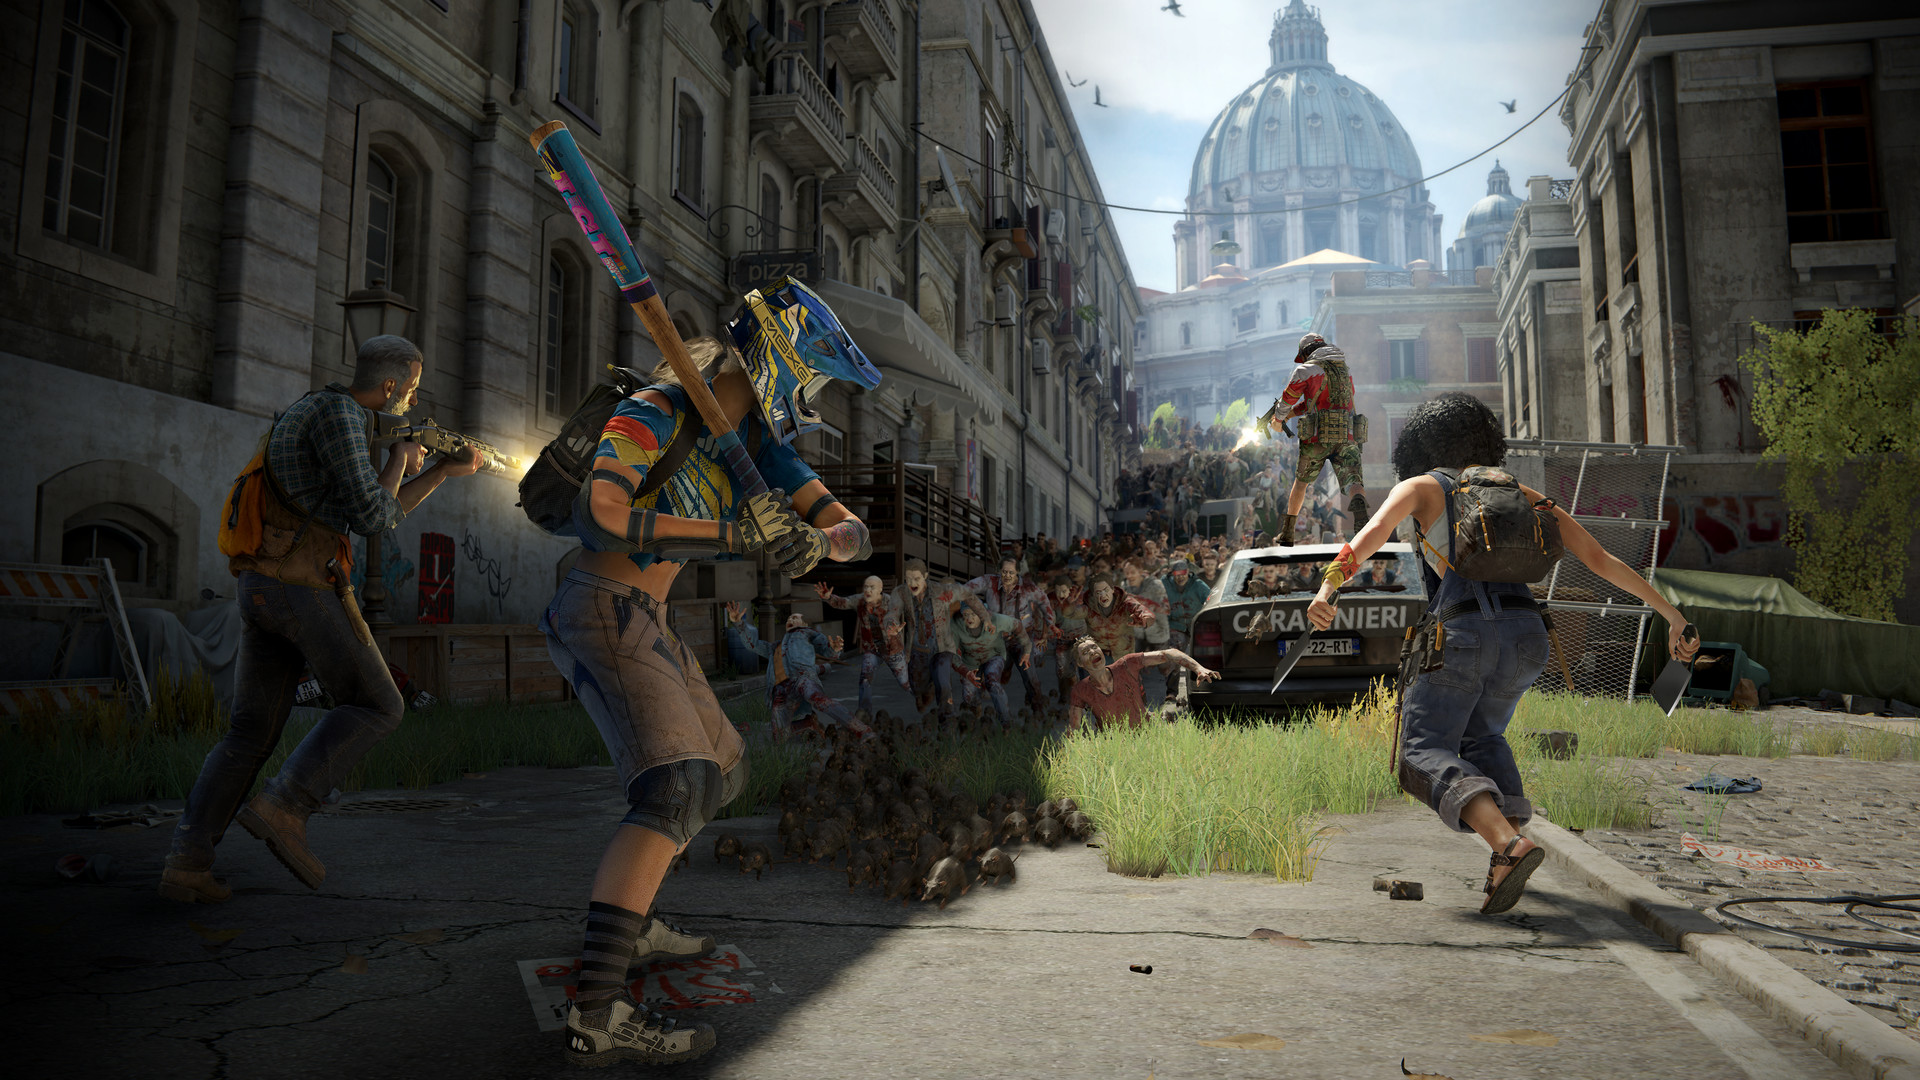 World War Z Reveal PC Requirements and Release Date